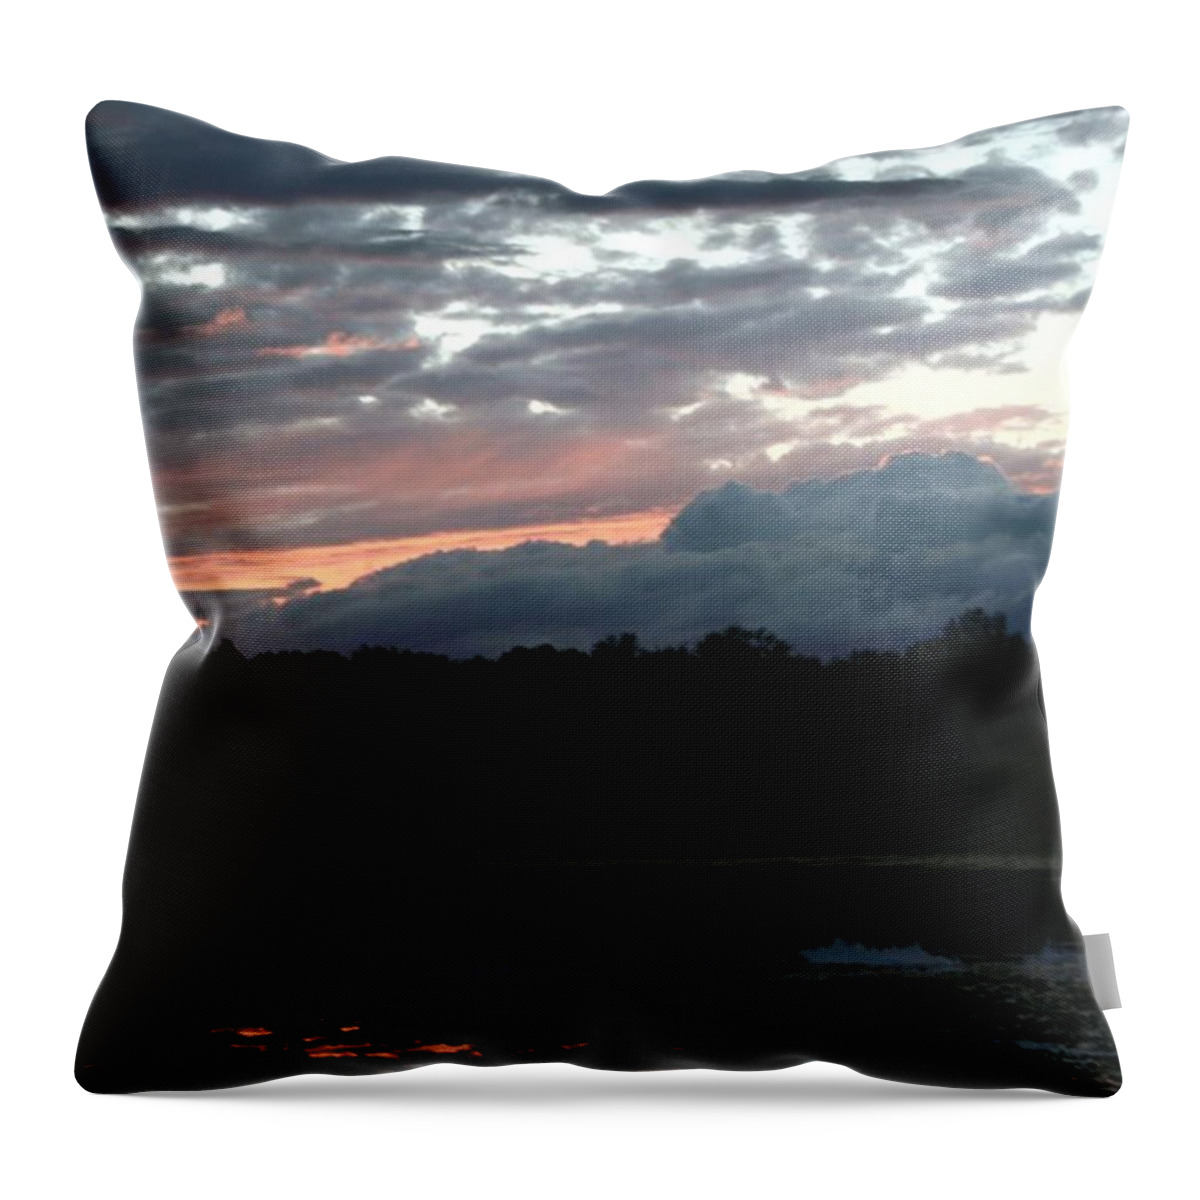  Throw Pillow featuring the photograph Windows Of The Soul by Robert Carey